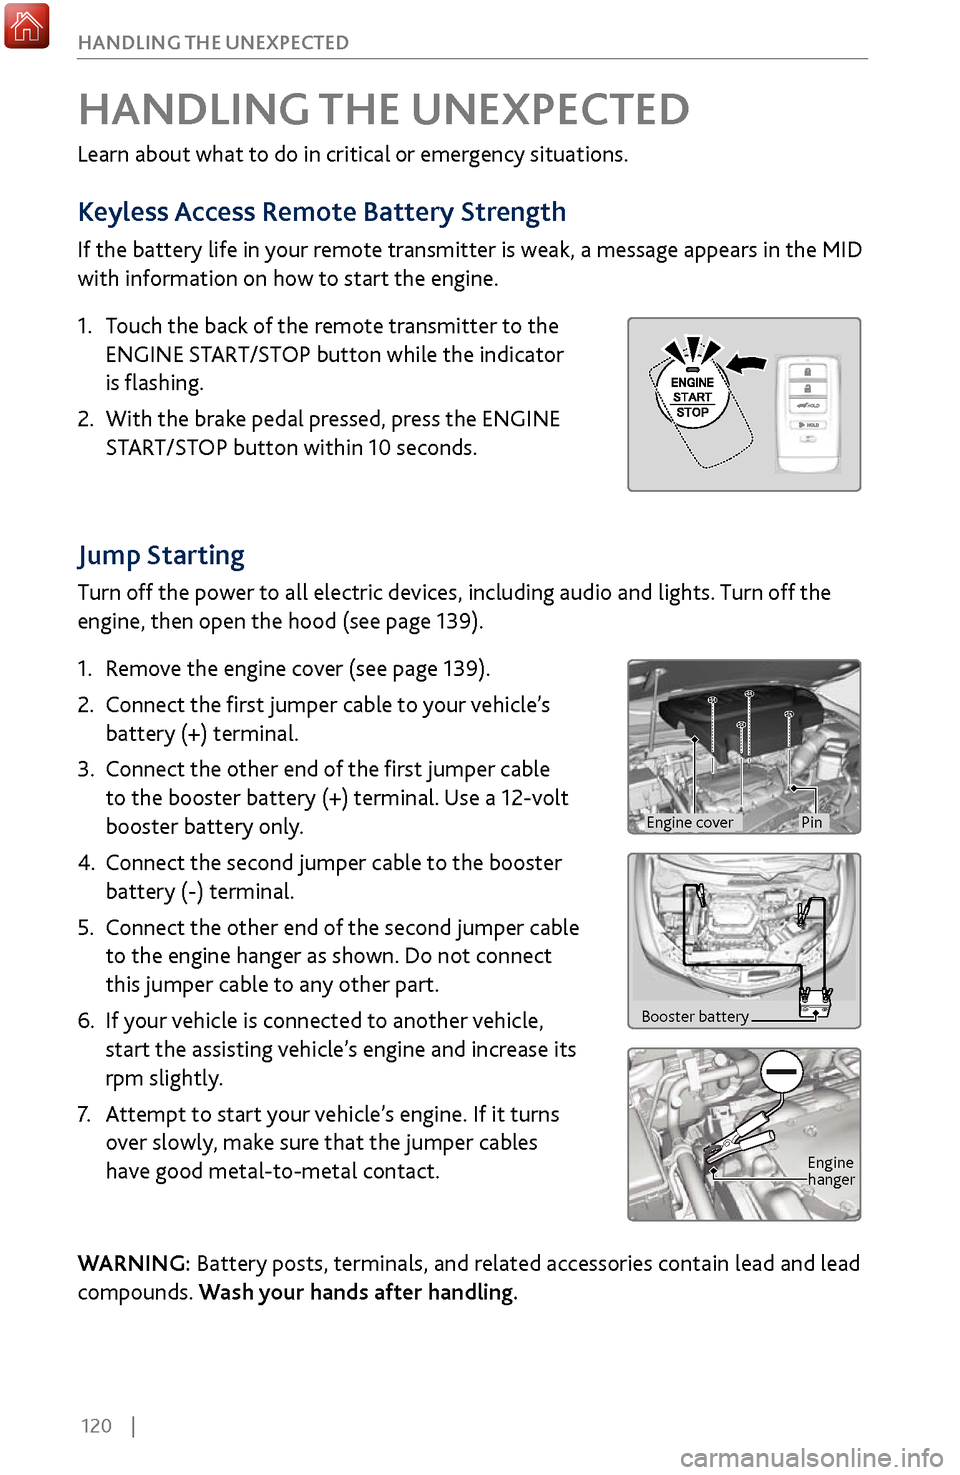 Acura MDX 2017  Owners Guide 120    |
HANDLING THE UNEXPECTED
Jump Starting
Turn off the power to all electric devices, including audio and lights. Turn off the 
engine, then open the hood (see page 139).
1.
 Remov

e the engine 